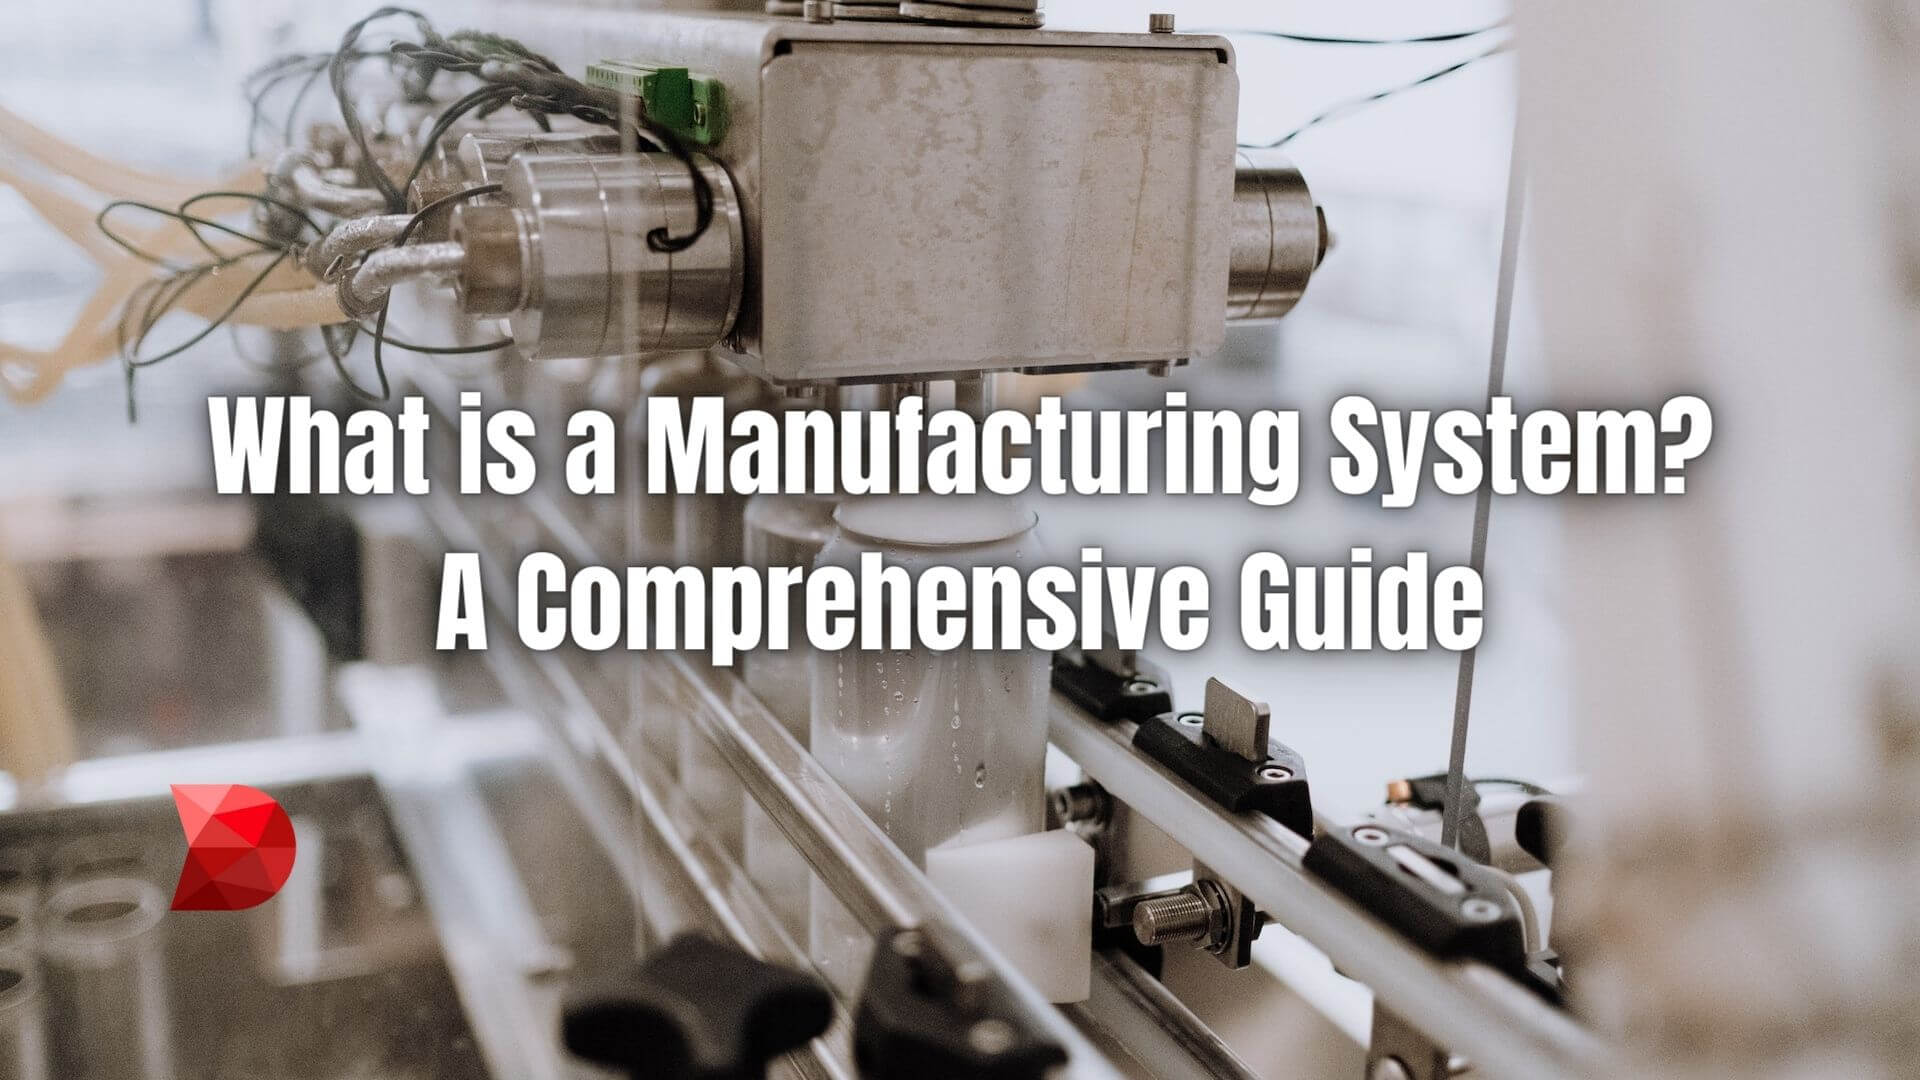 Manufacturing systems help production-oriented businesses streamline operations, improve efficiency, and increase profitability. Learn more!